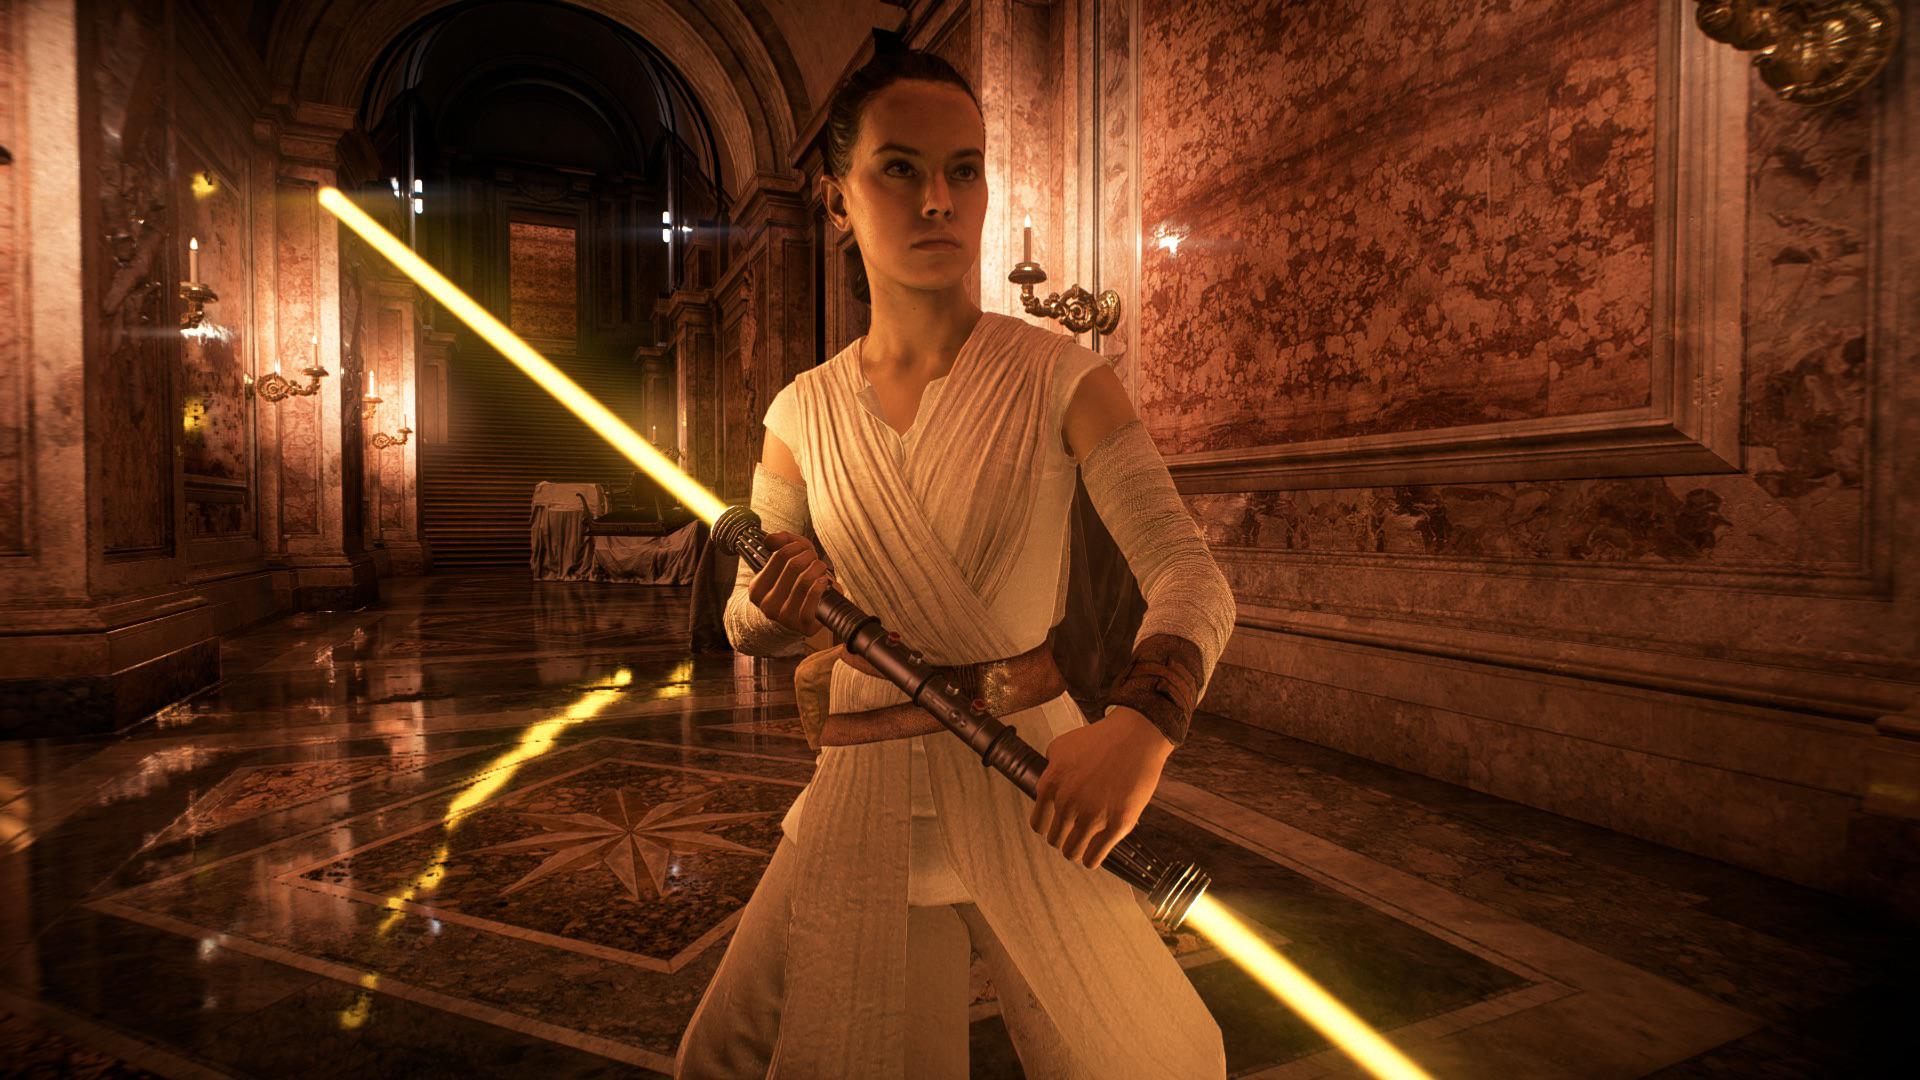 It would have been cool if Rey had a double bladed saber to match